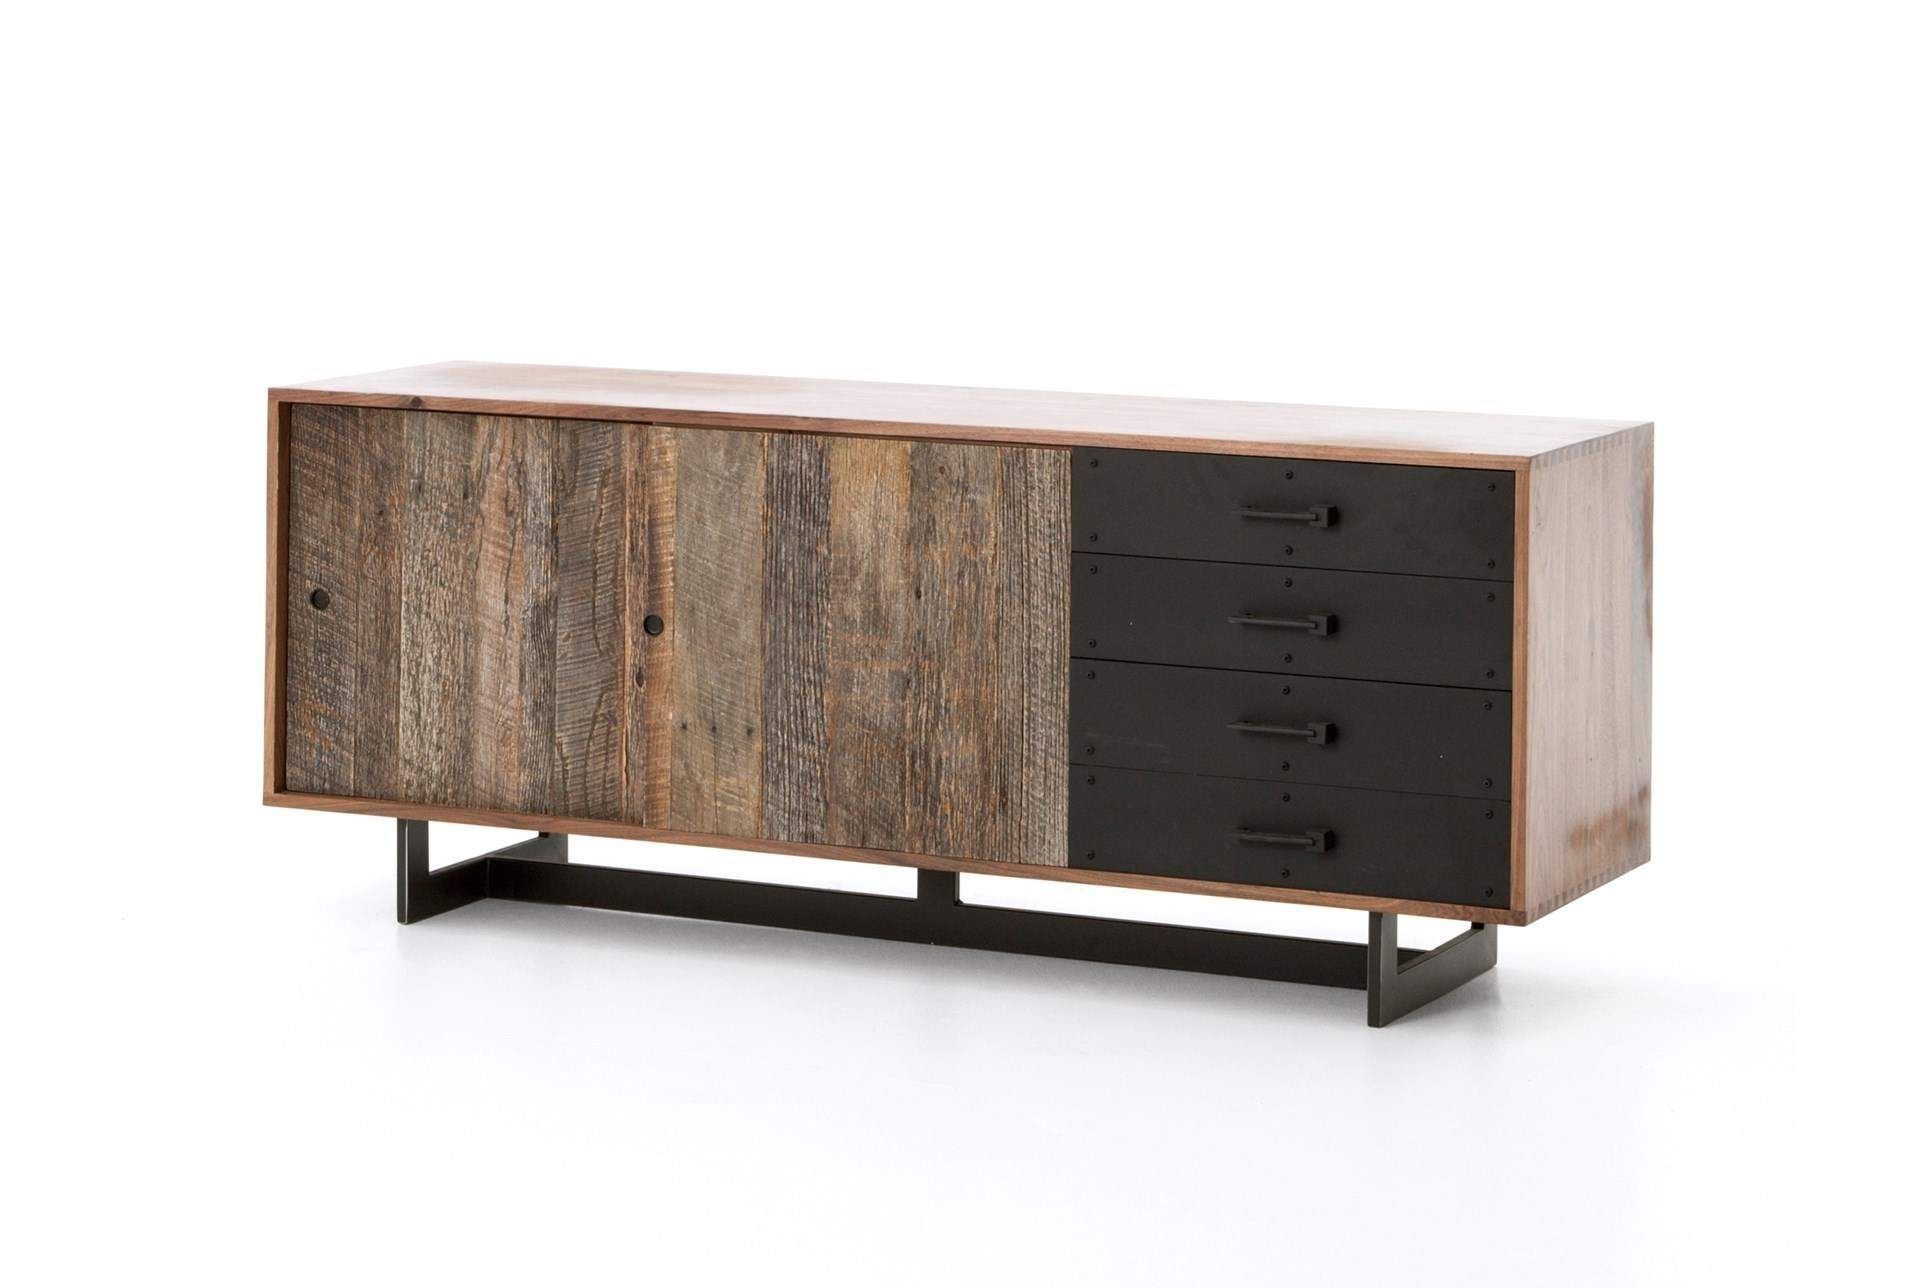 Shop For Mikelson Sideboard At Livingspaces (View 2 of 30)